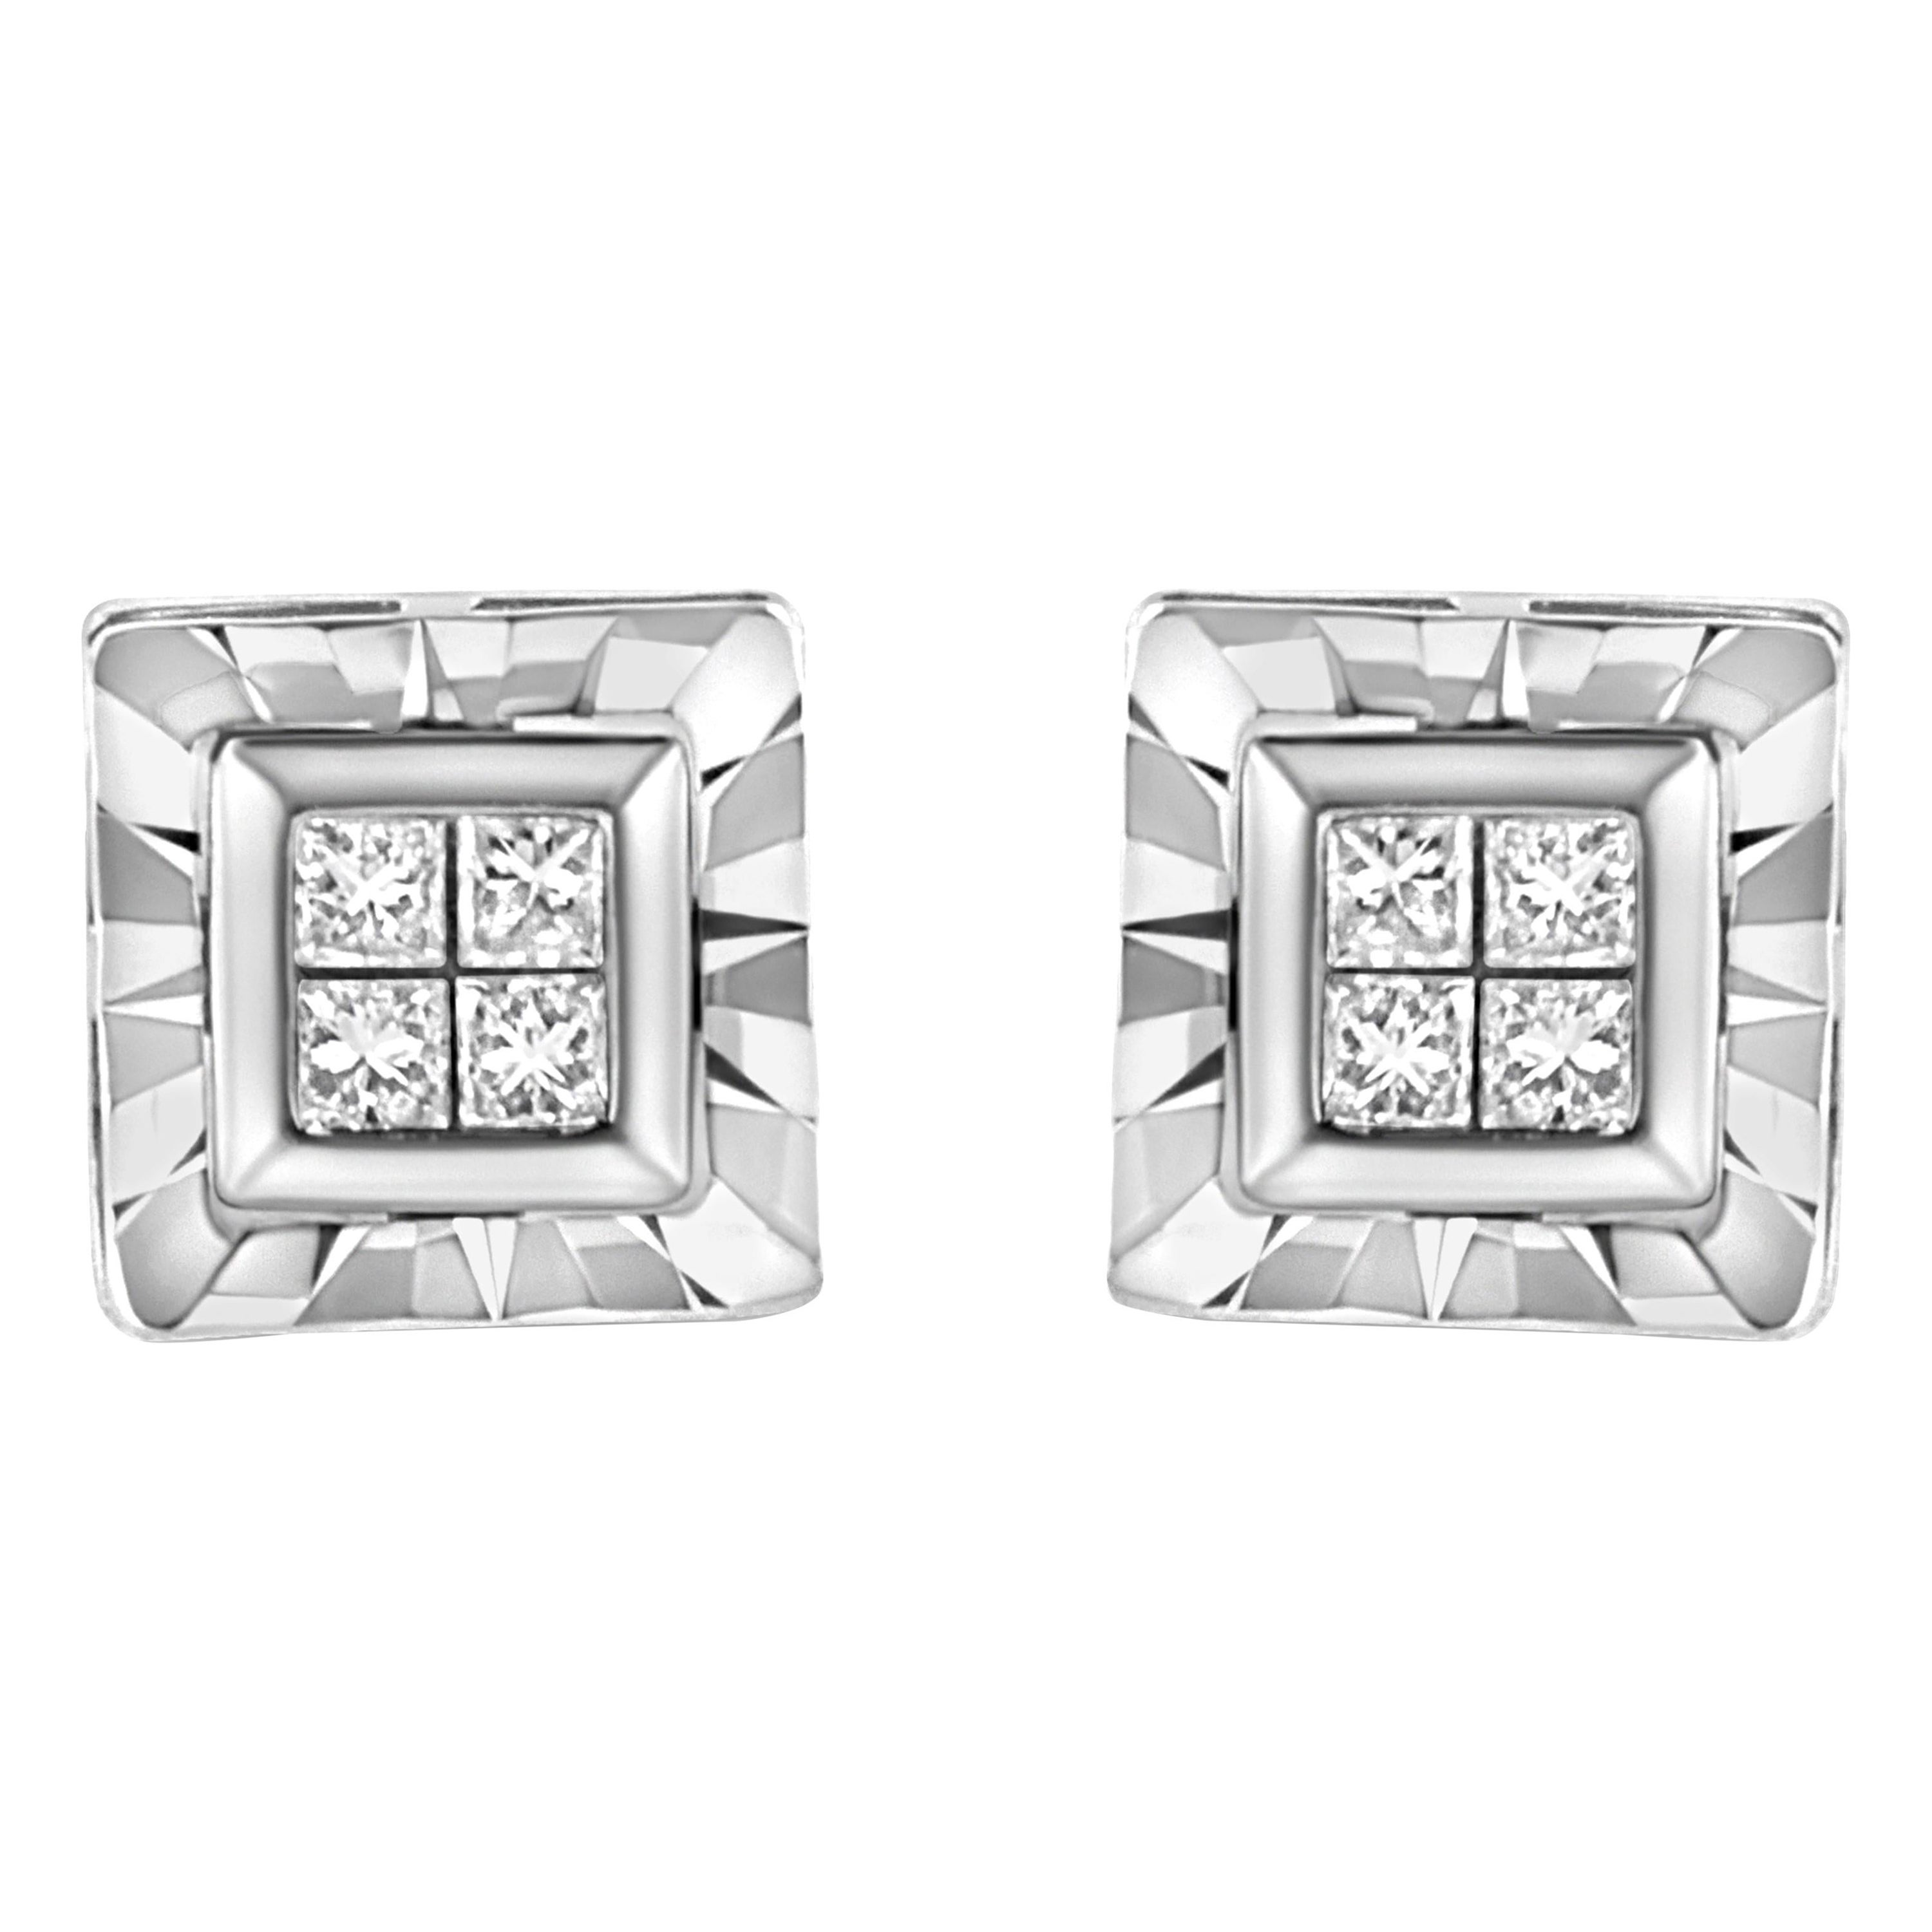 Black Natural Diamond Square Studs Earrings in14K White Gold Over Sterling Silver 0.15 Cttw